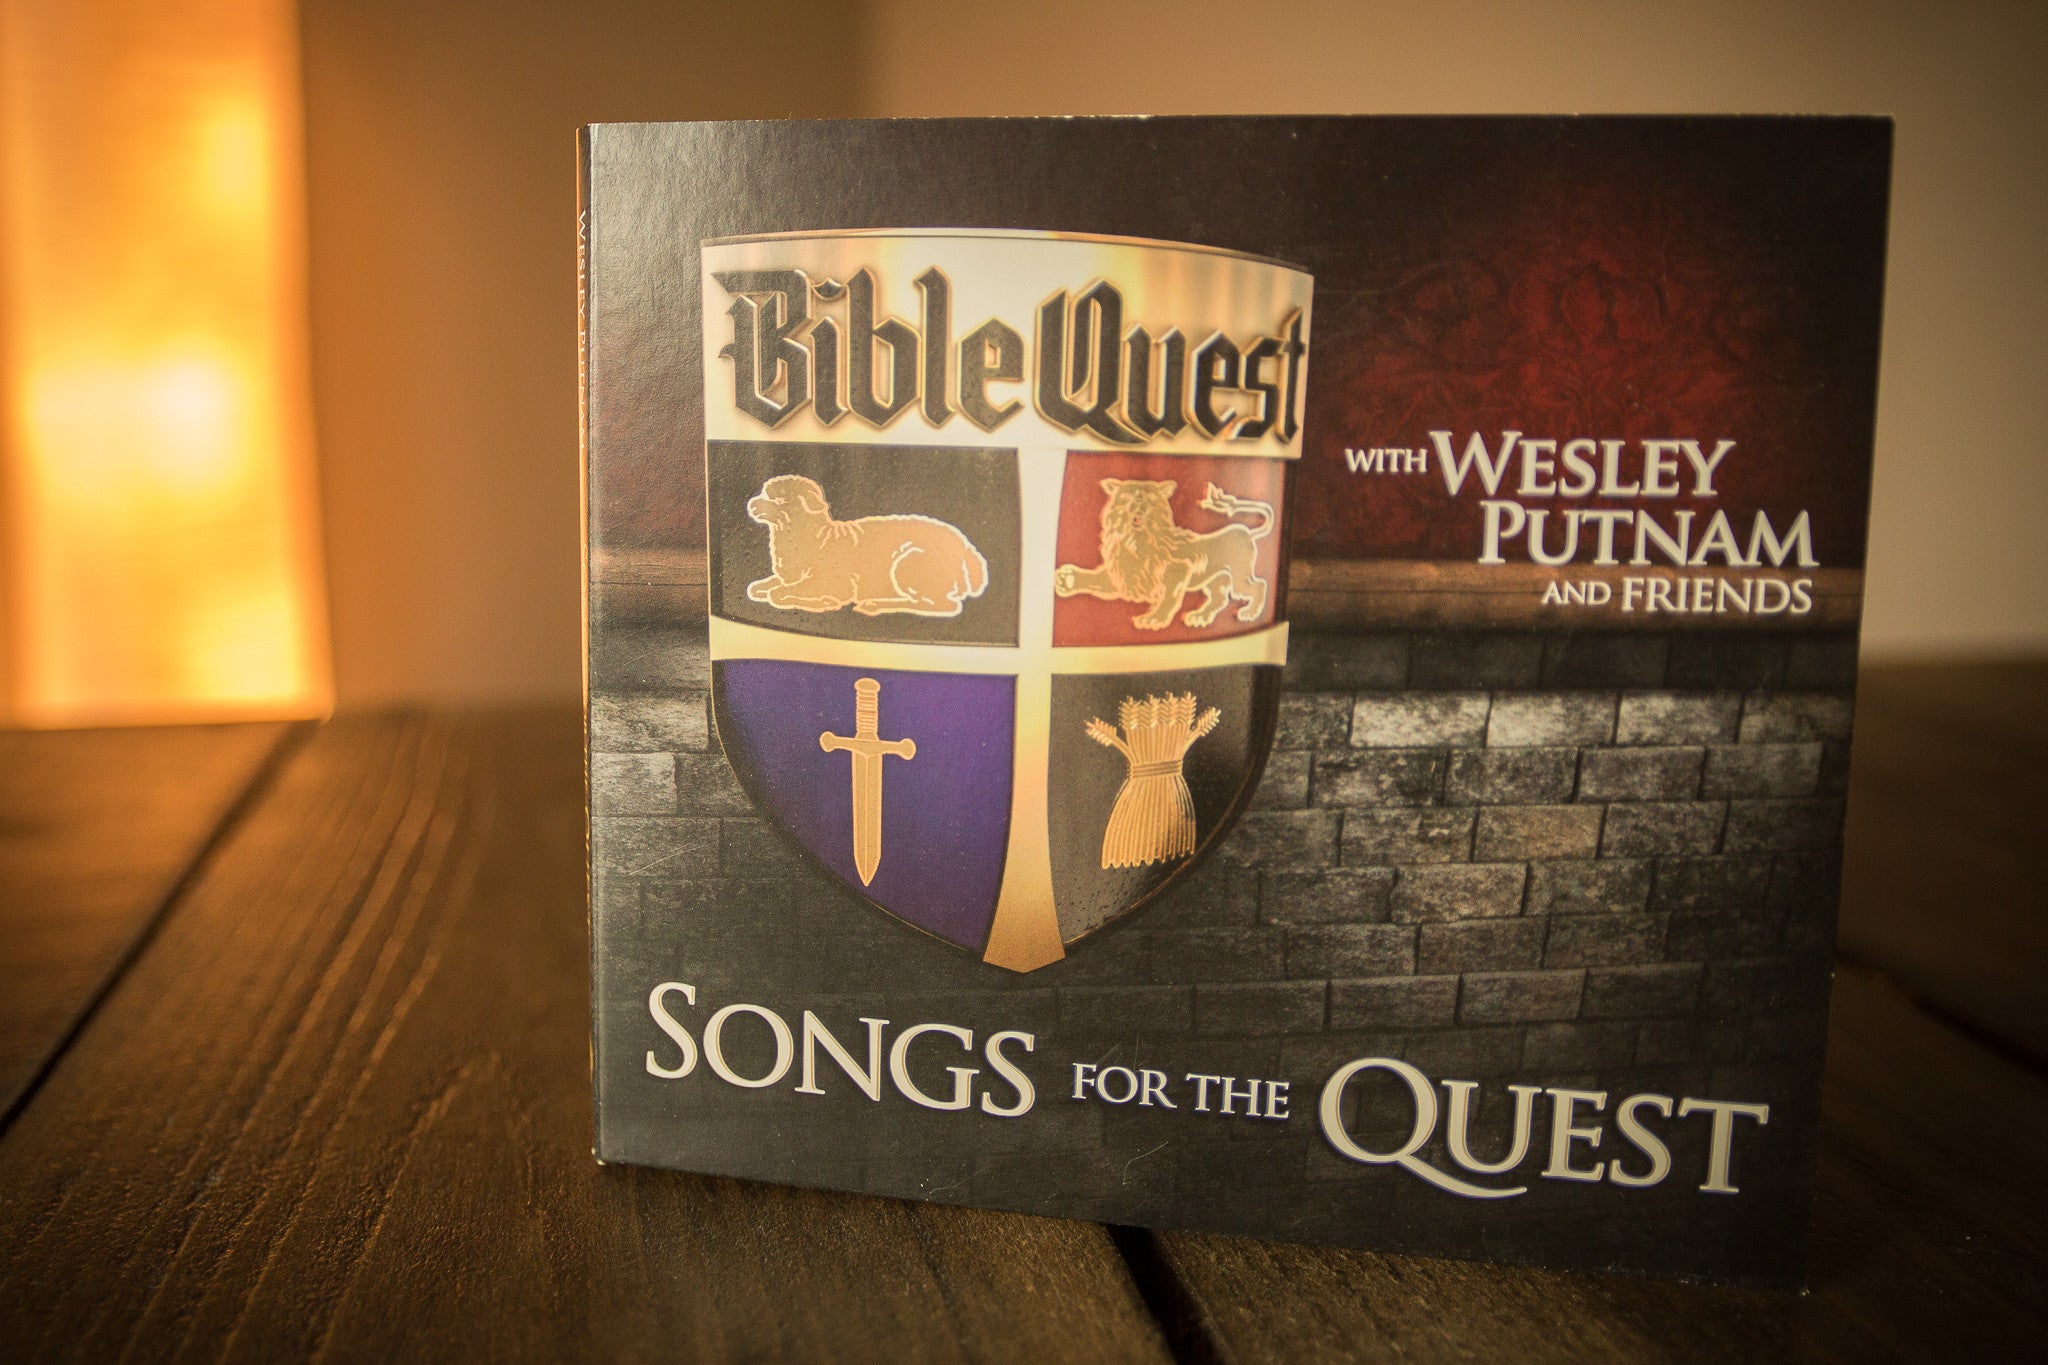 Songs For the Quest